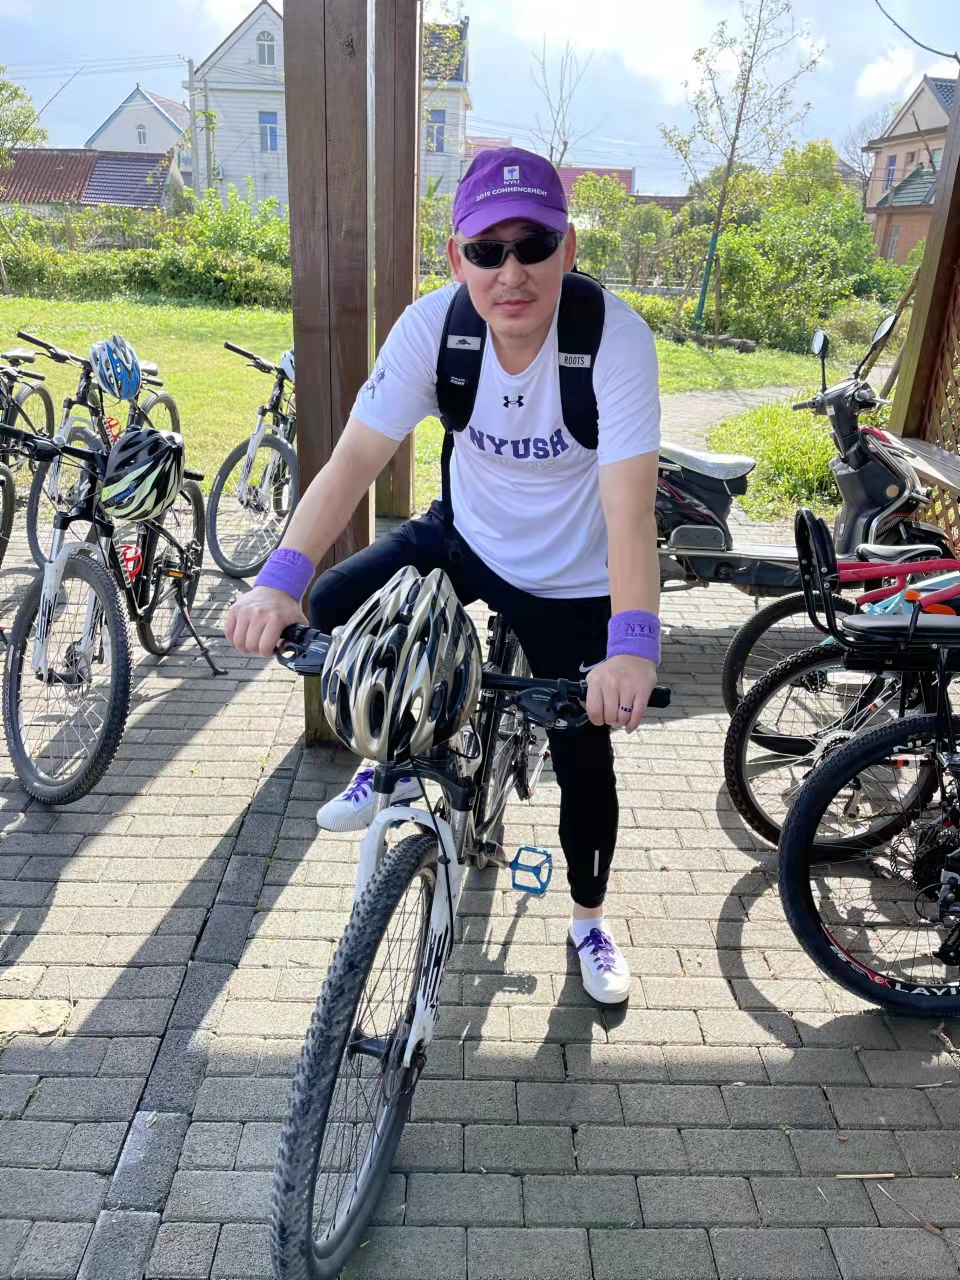 Ding posing on a bicycle and wearing a lot of NYU Shanghai purple gear